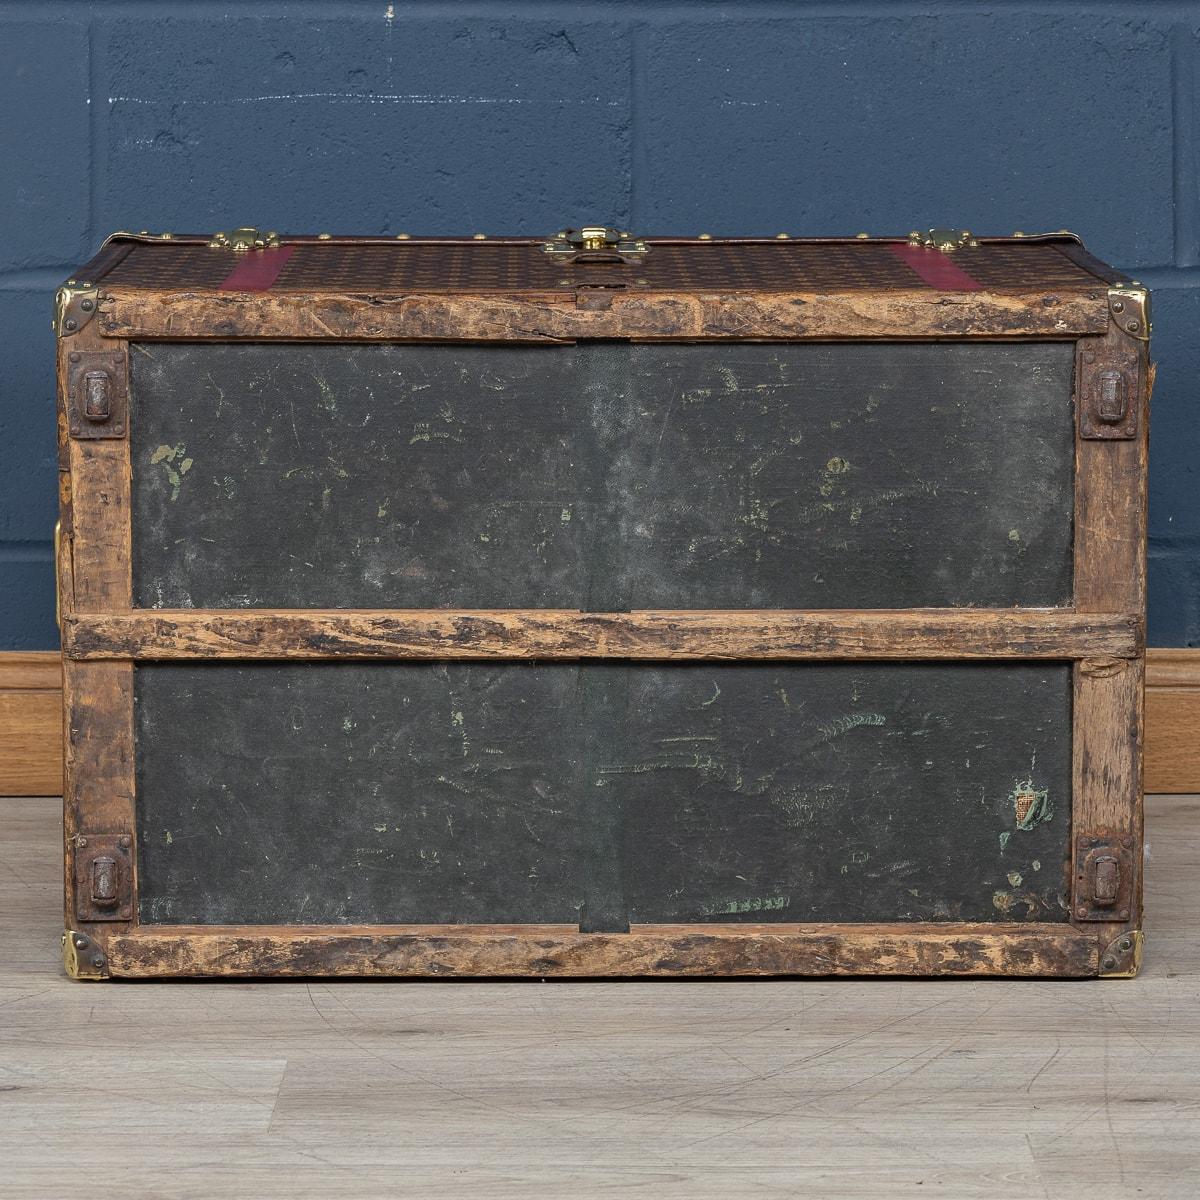 Early 20th Century Antique 20th Century Louis Vuitton Hat Trunk In Monogram Canvas, France c.1910 For Sale